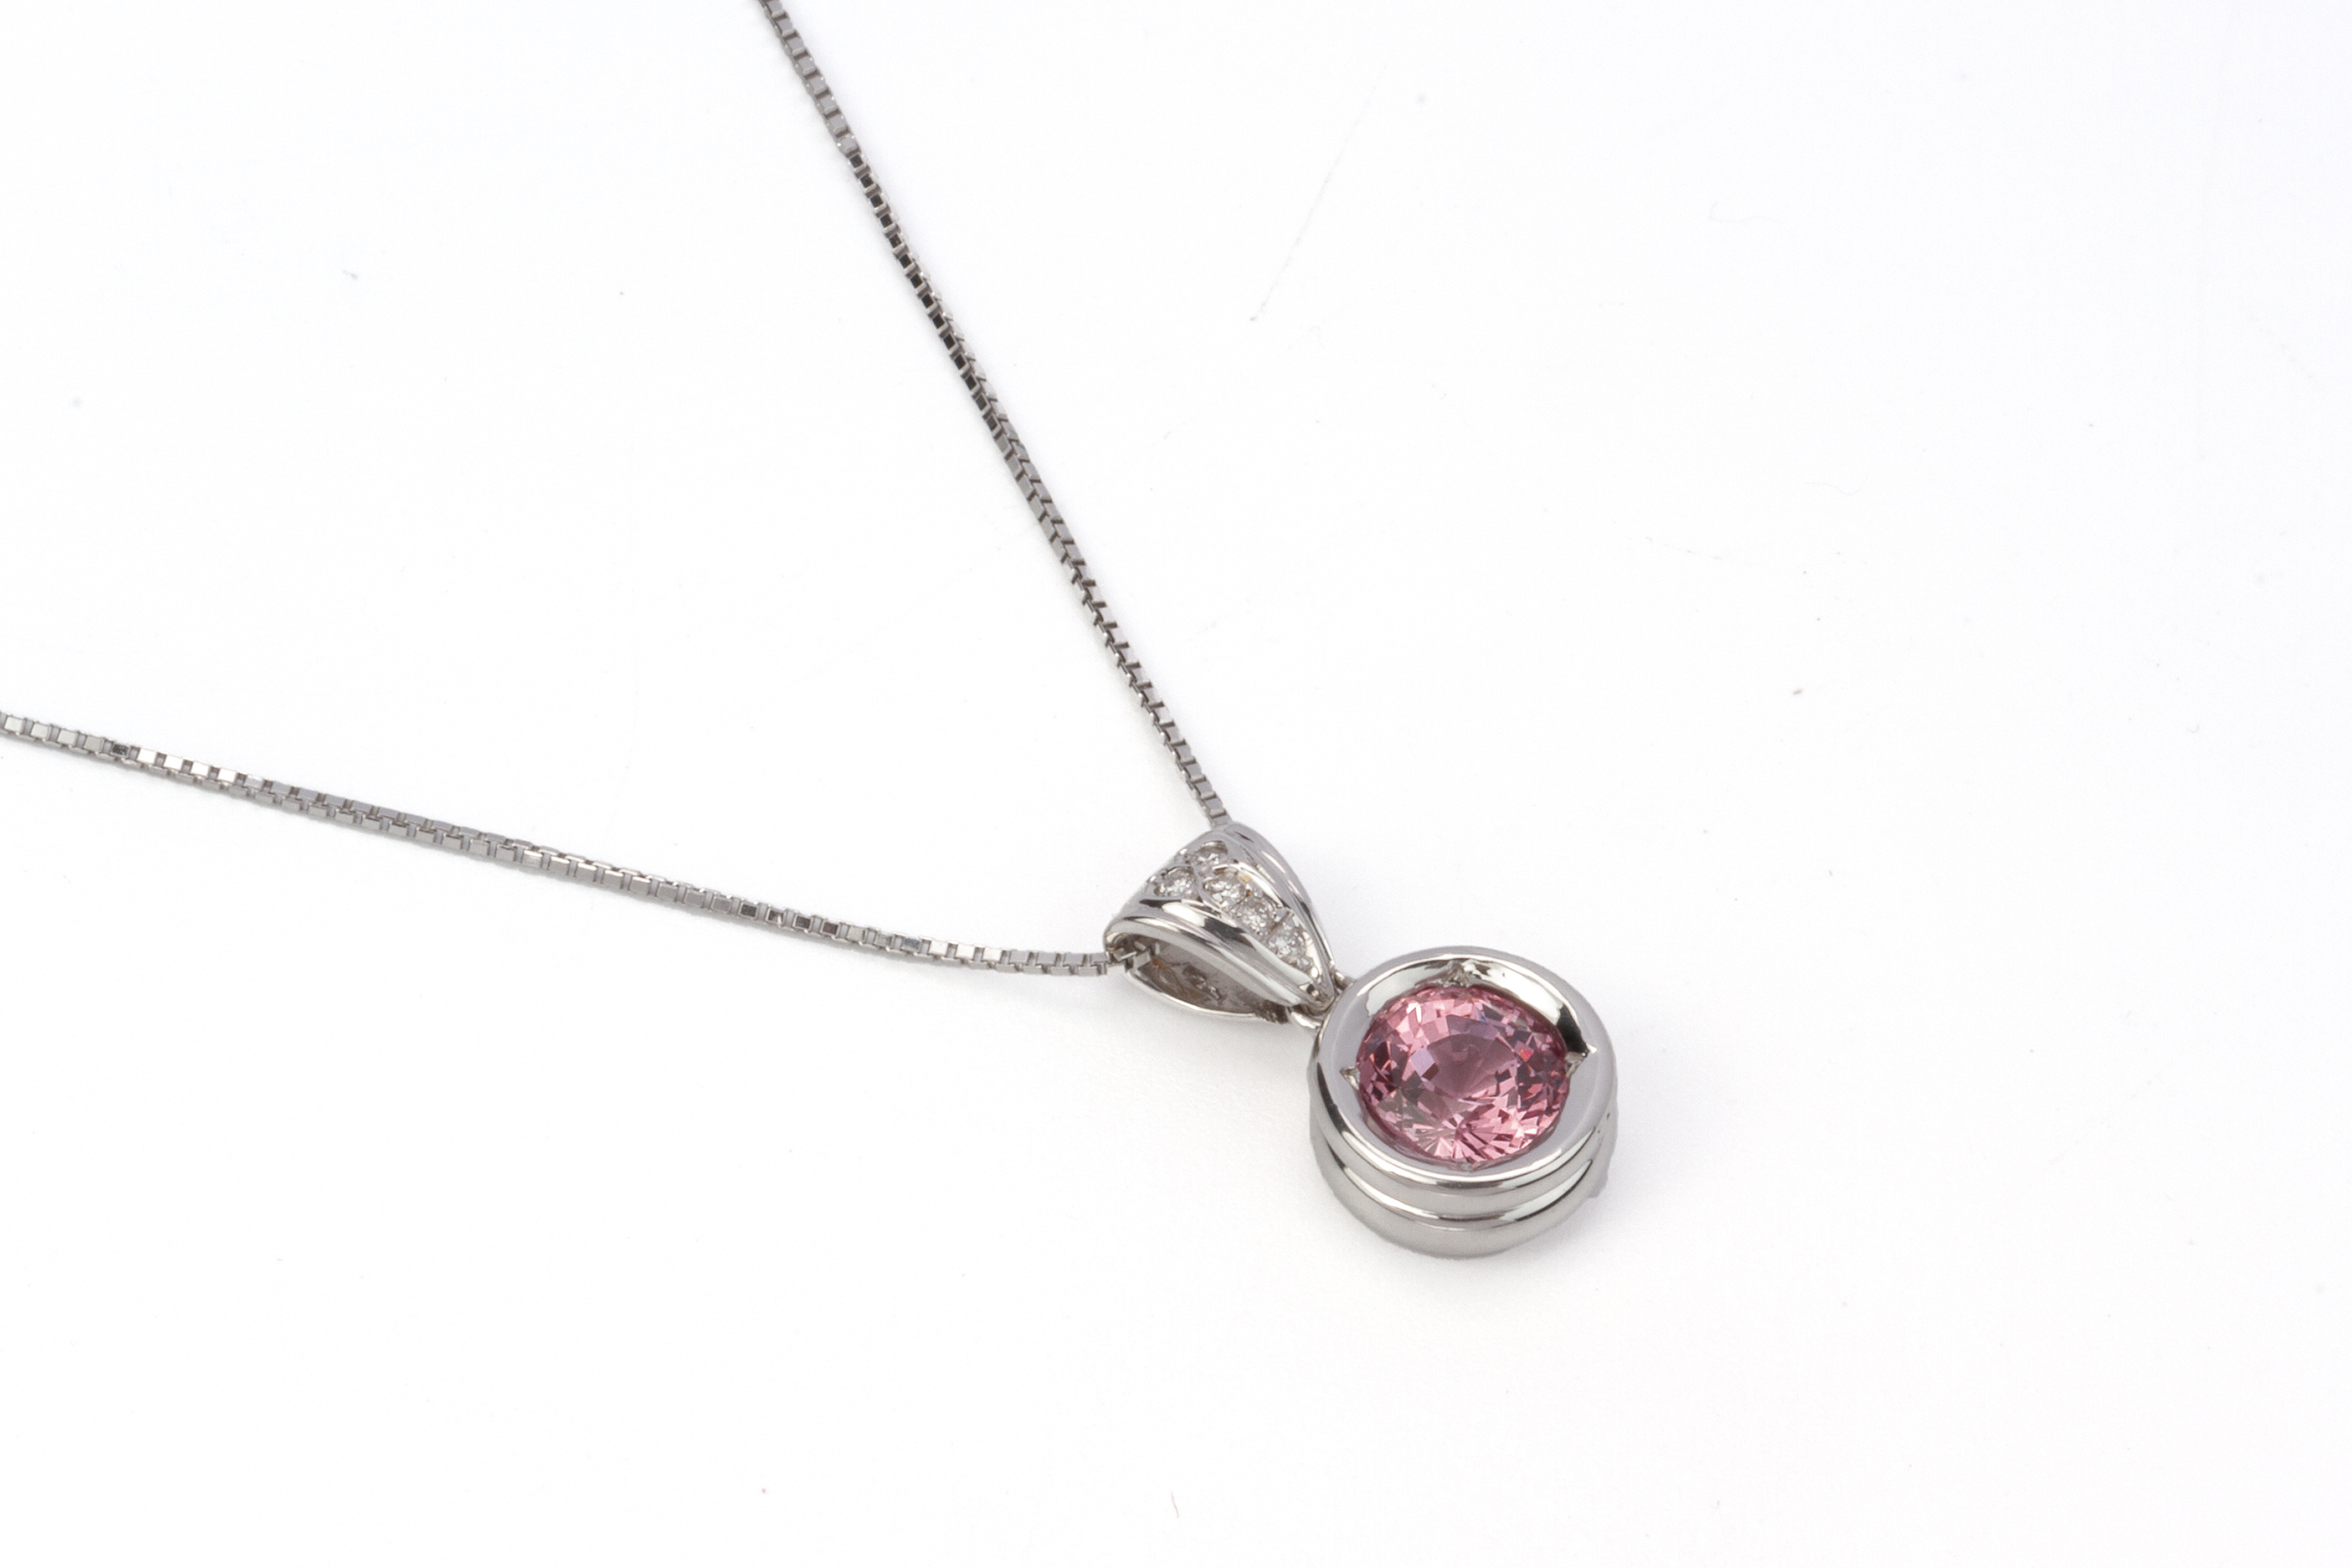 A PINK SPINEL AND DIAMOND PENDANT ON CHAIN - Image 4 of 4